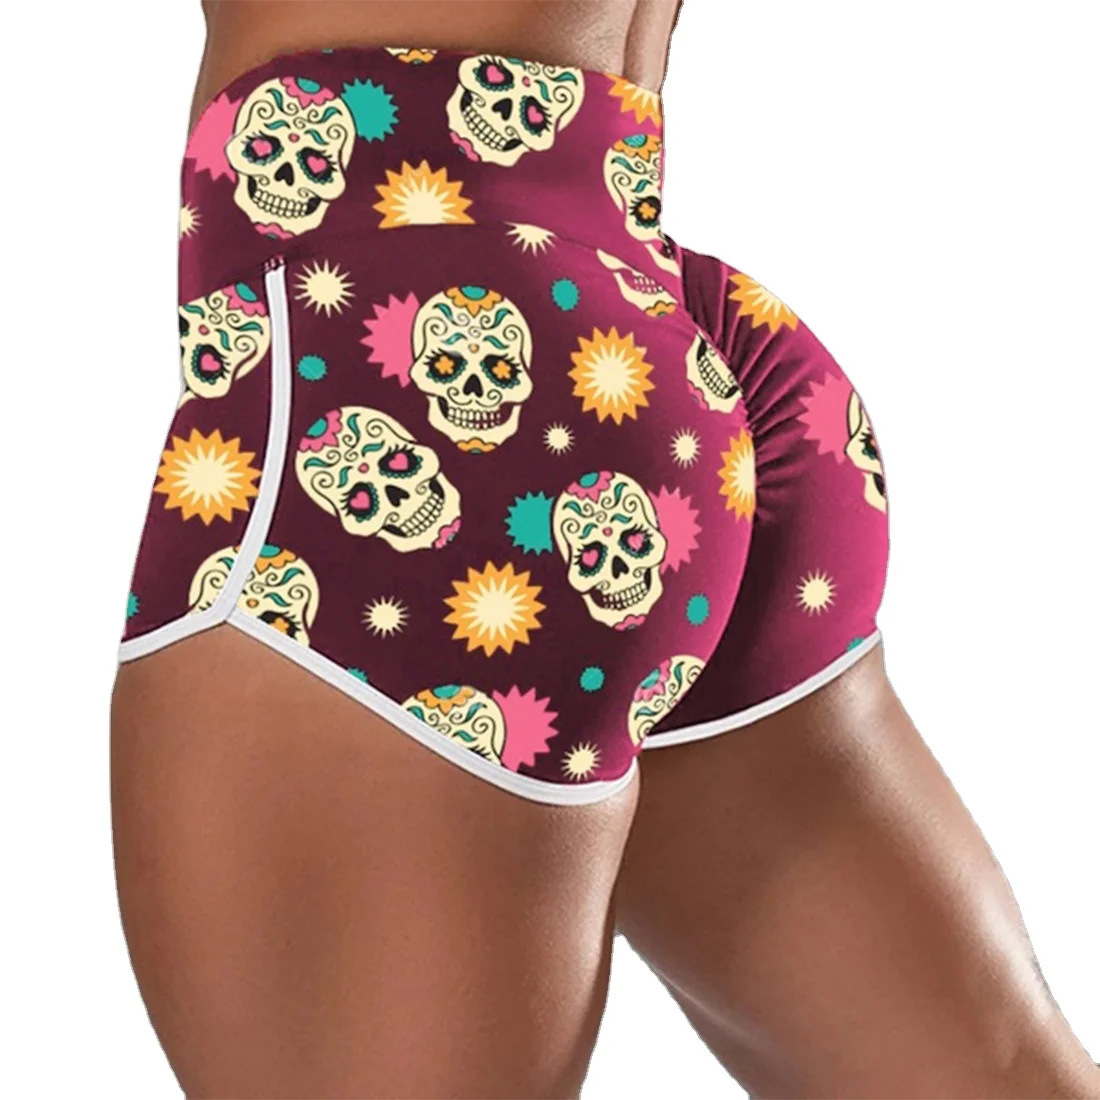 

Stylish new leggings with high waists and hip lifts Skull print running shorts make for a temperament-commuting look